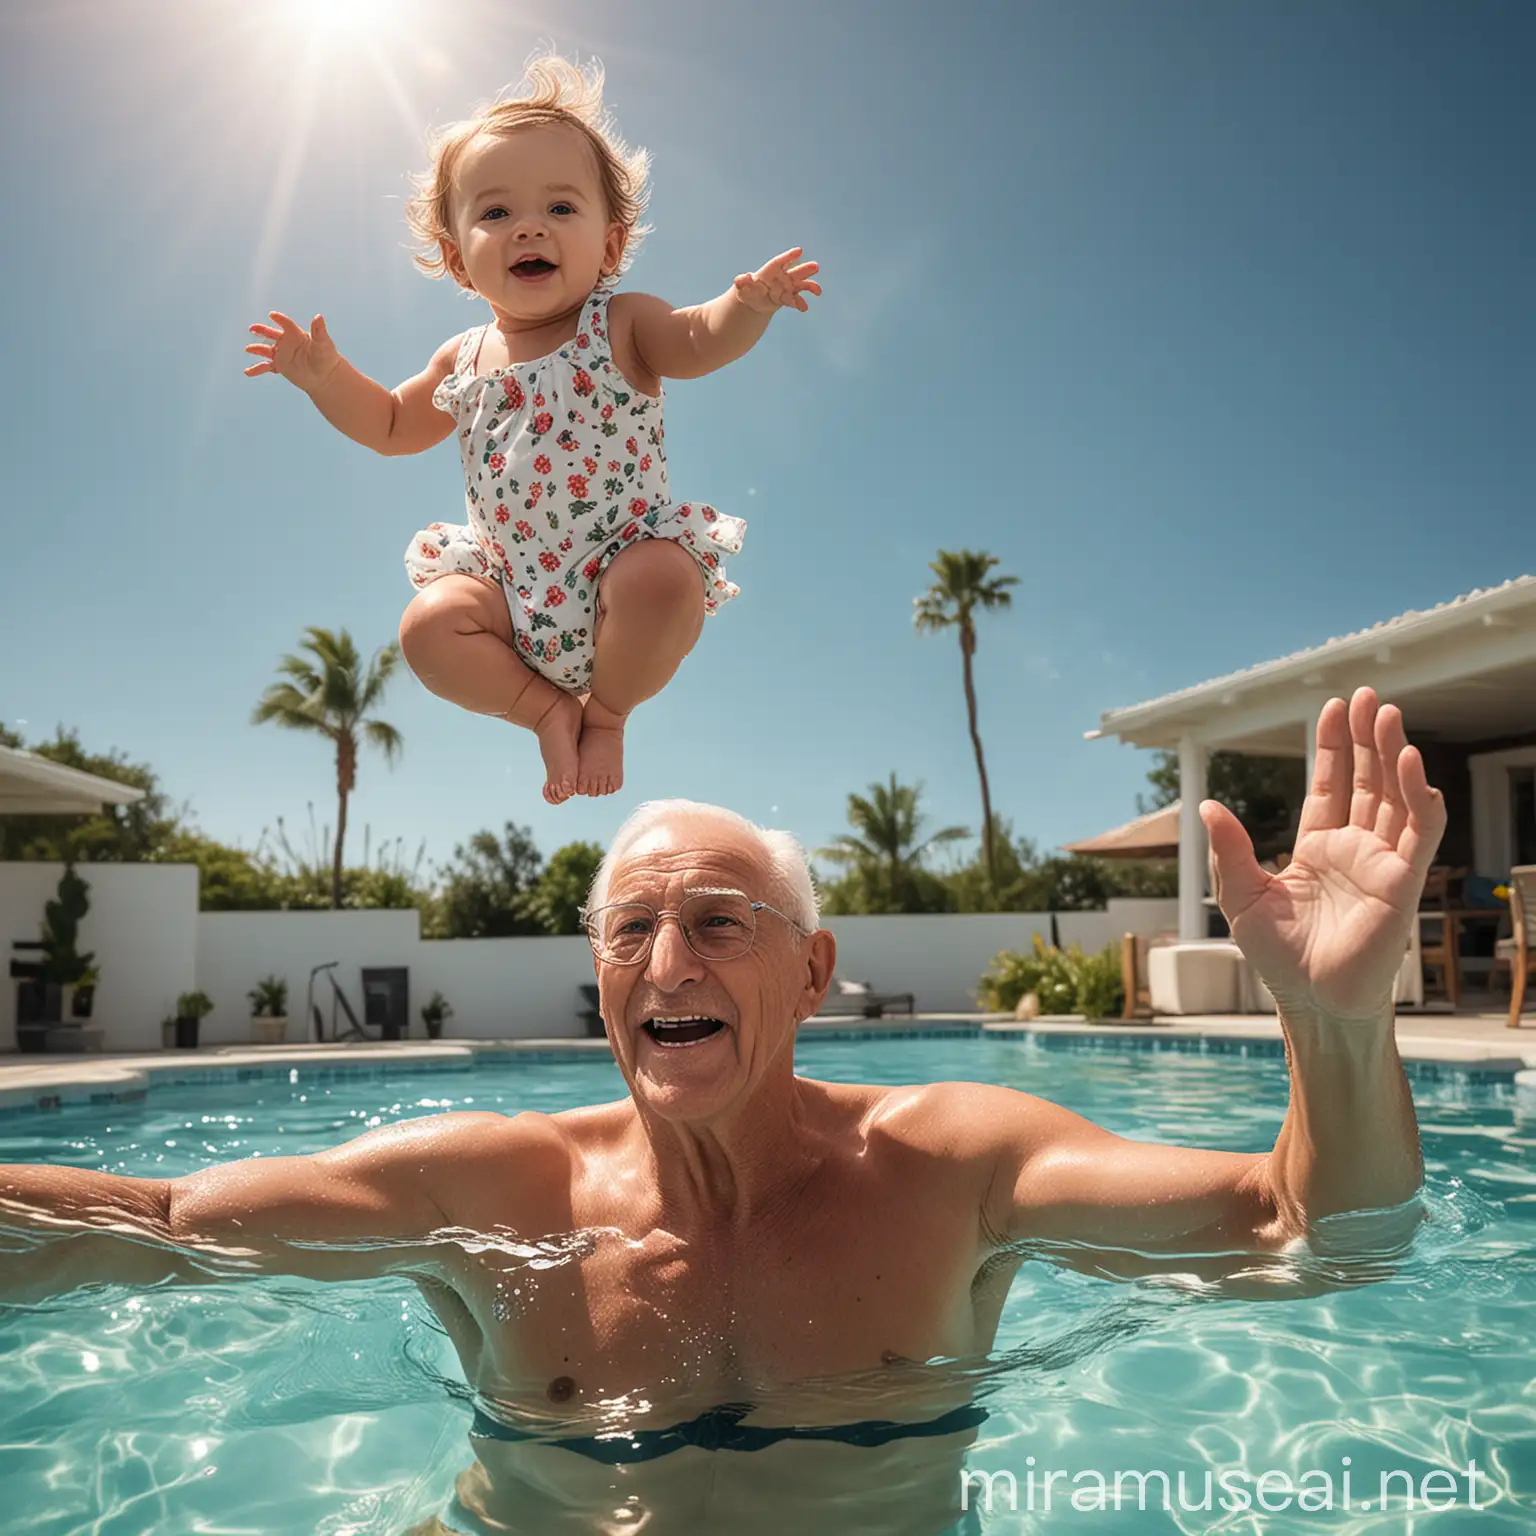 create a realistic image of a grandfather in a swimming pool holding his infant grand daughter in the air with two hands